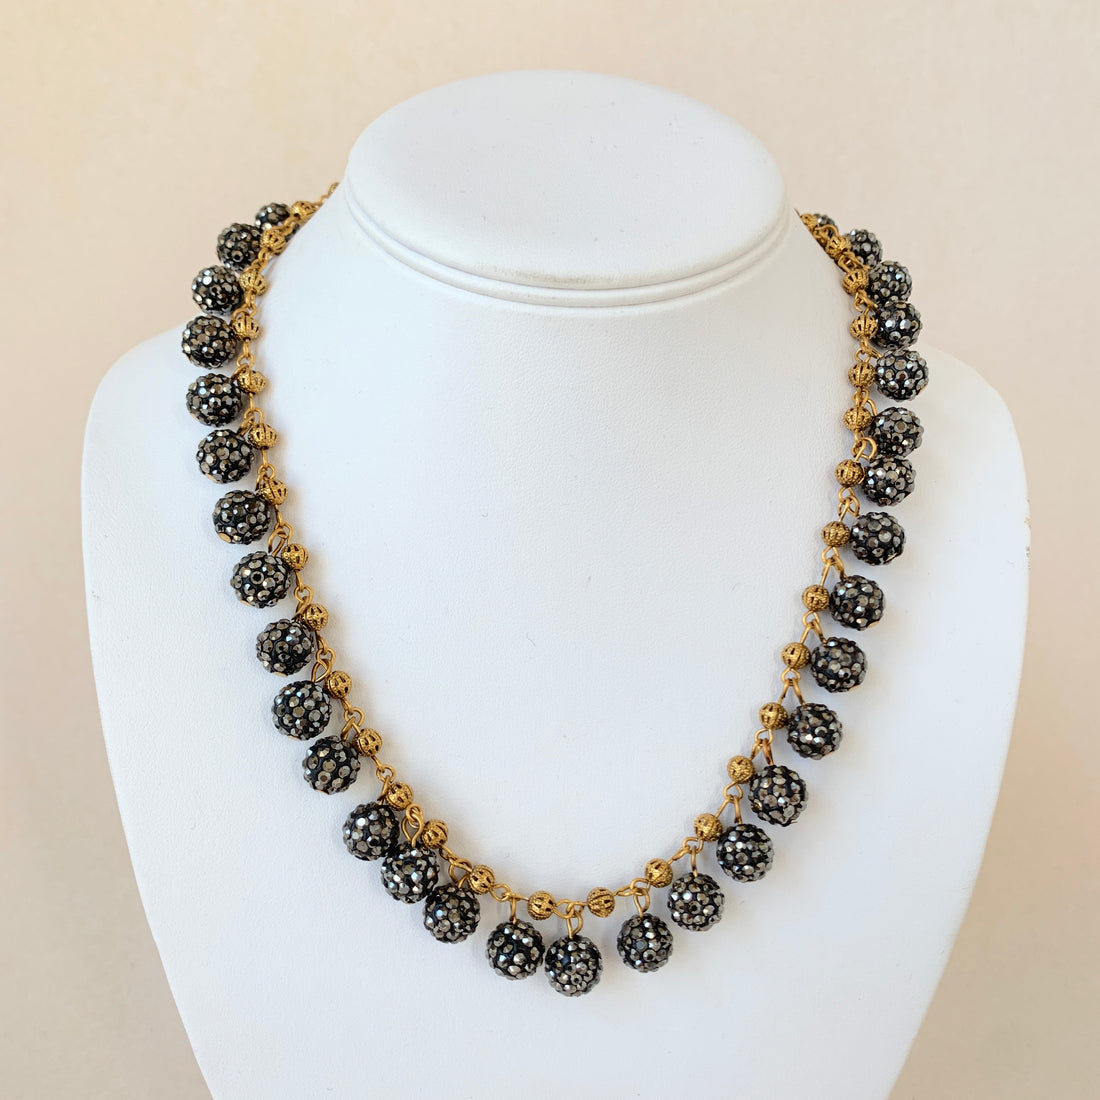 Vintage-Inspired Rhinestone Pave Charm Necklace